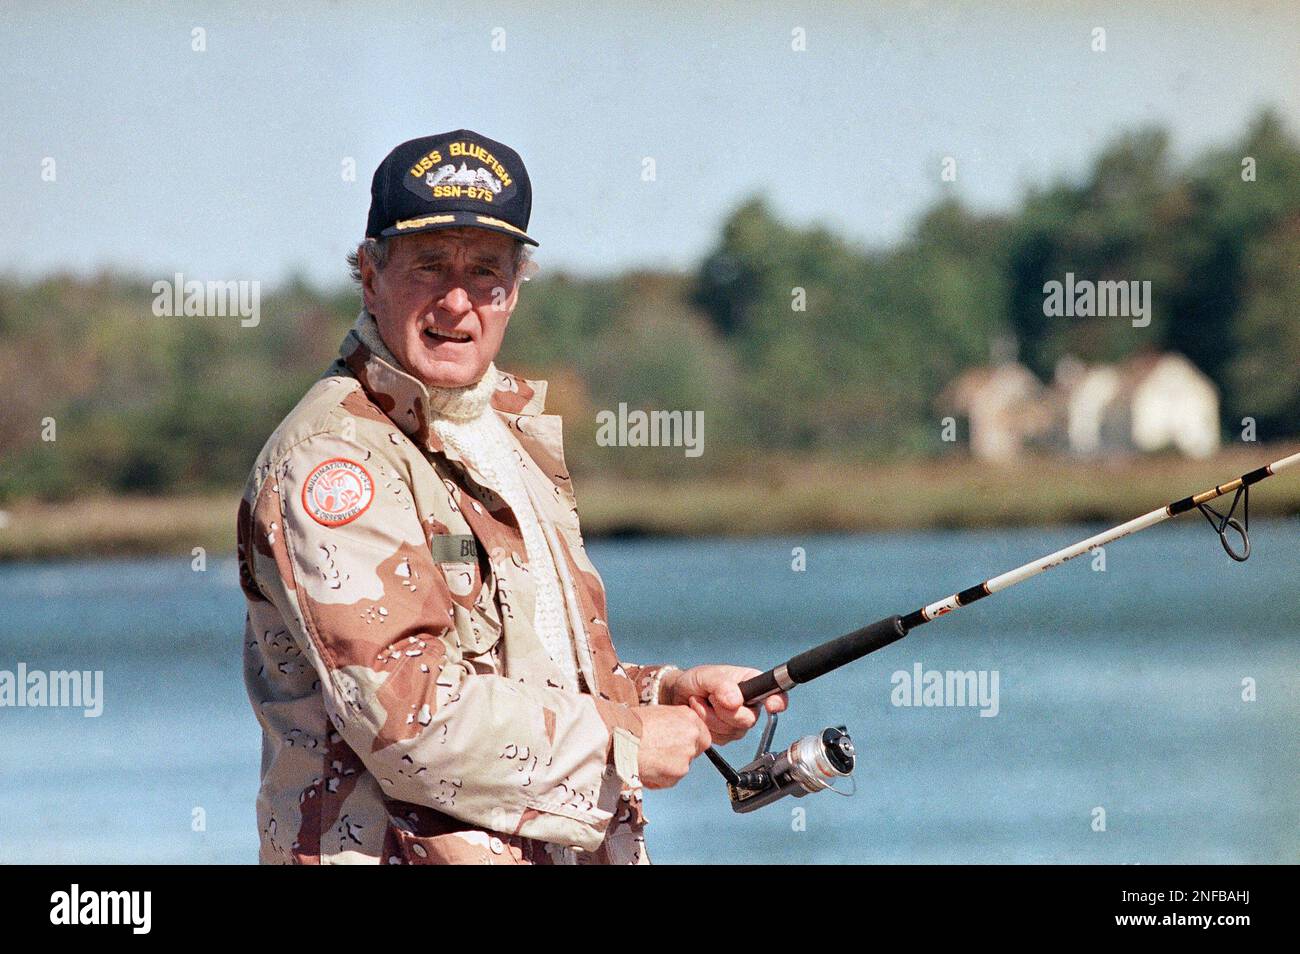 President George Bush casts his fishing rod at the mouth of the